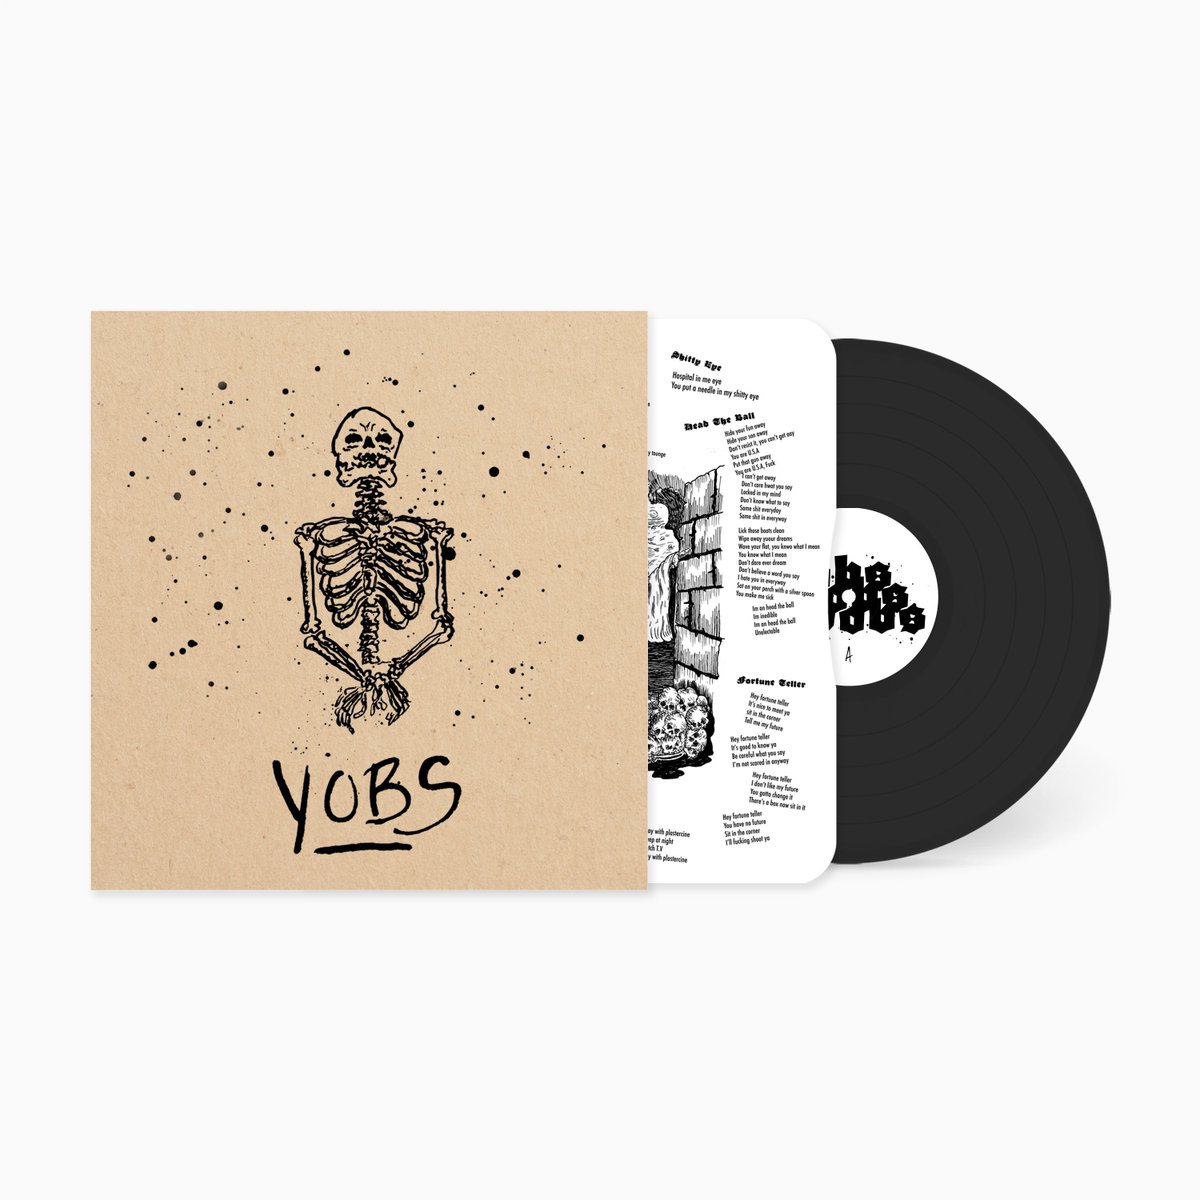 ICYMI @yobsyobsyobs self-titled debut LP was released last Friday and they saw in the release with an incredible show at the Fuzz Club festival that night 💥 You can stream/purchase the album here: yobs.lnk.to/yobs